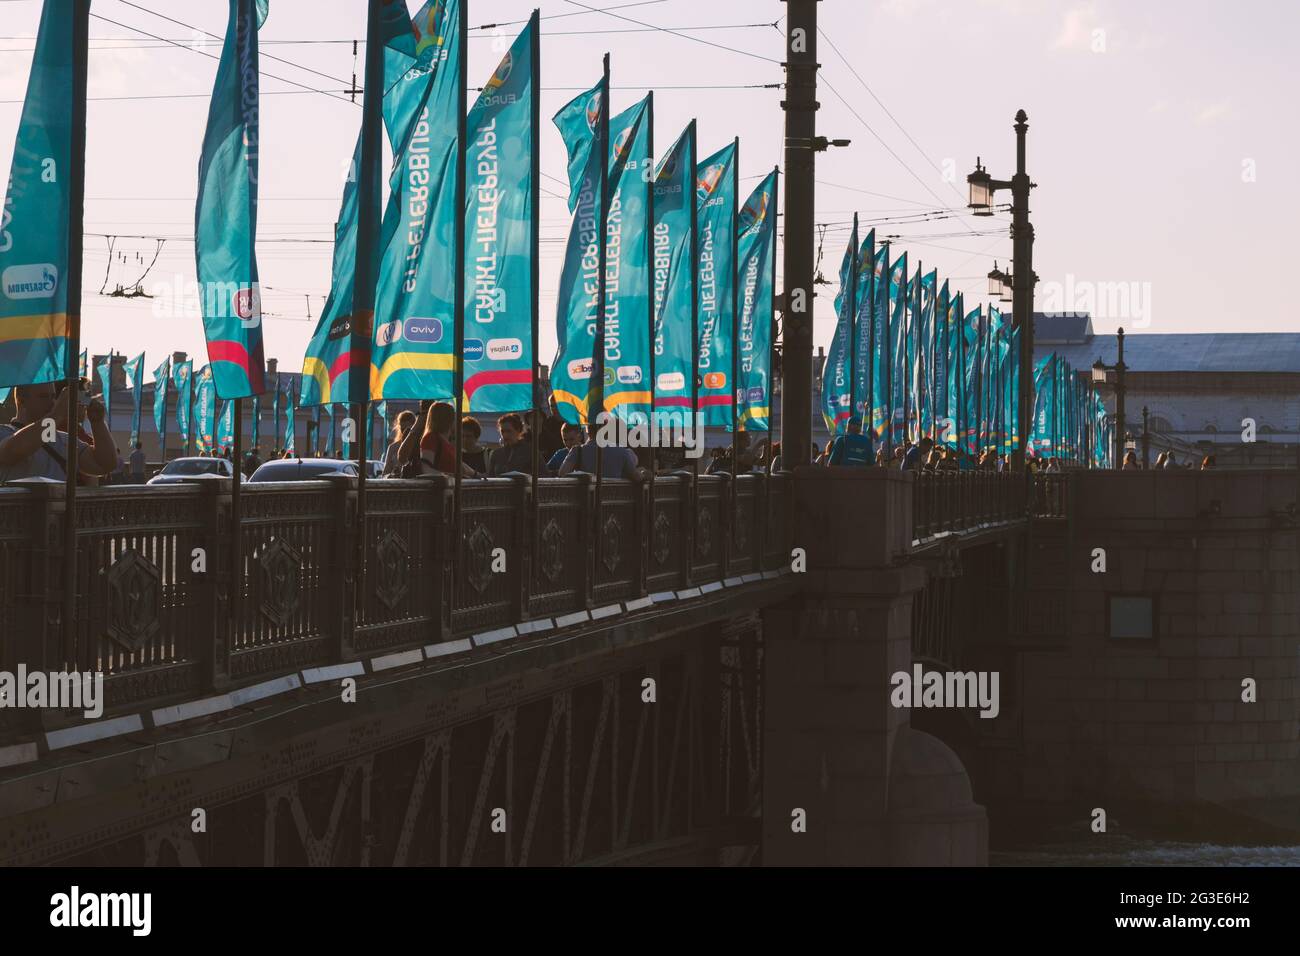 Saint-Petersburg, Russia - June 12, 2021: Flags with the symbols of the football championship 'Euro 2020' are installed on flagpoles Stock Photo